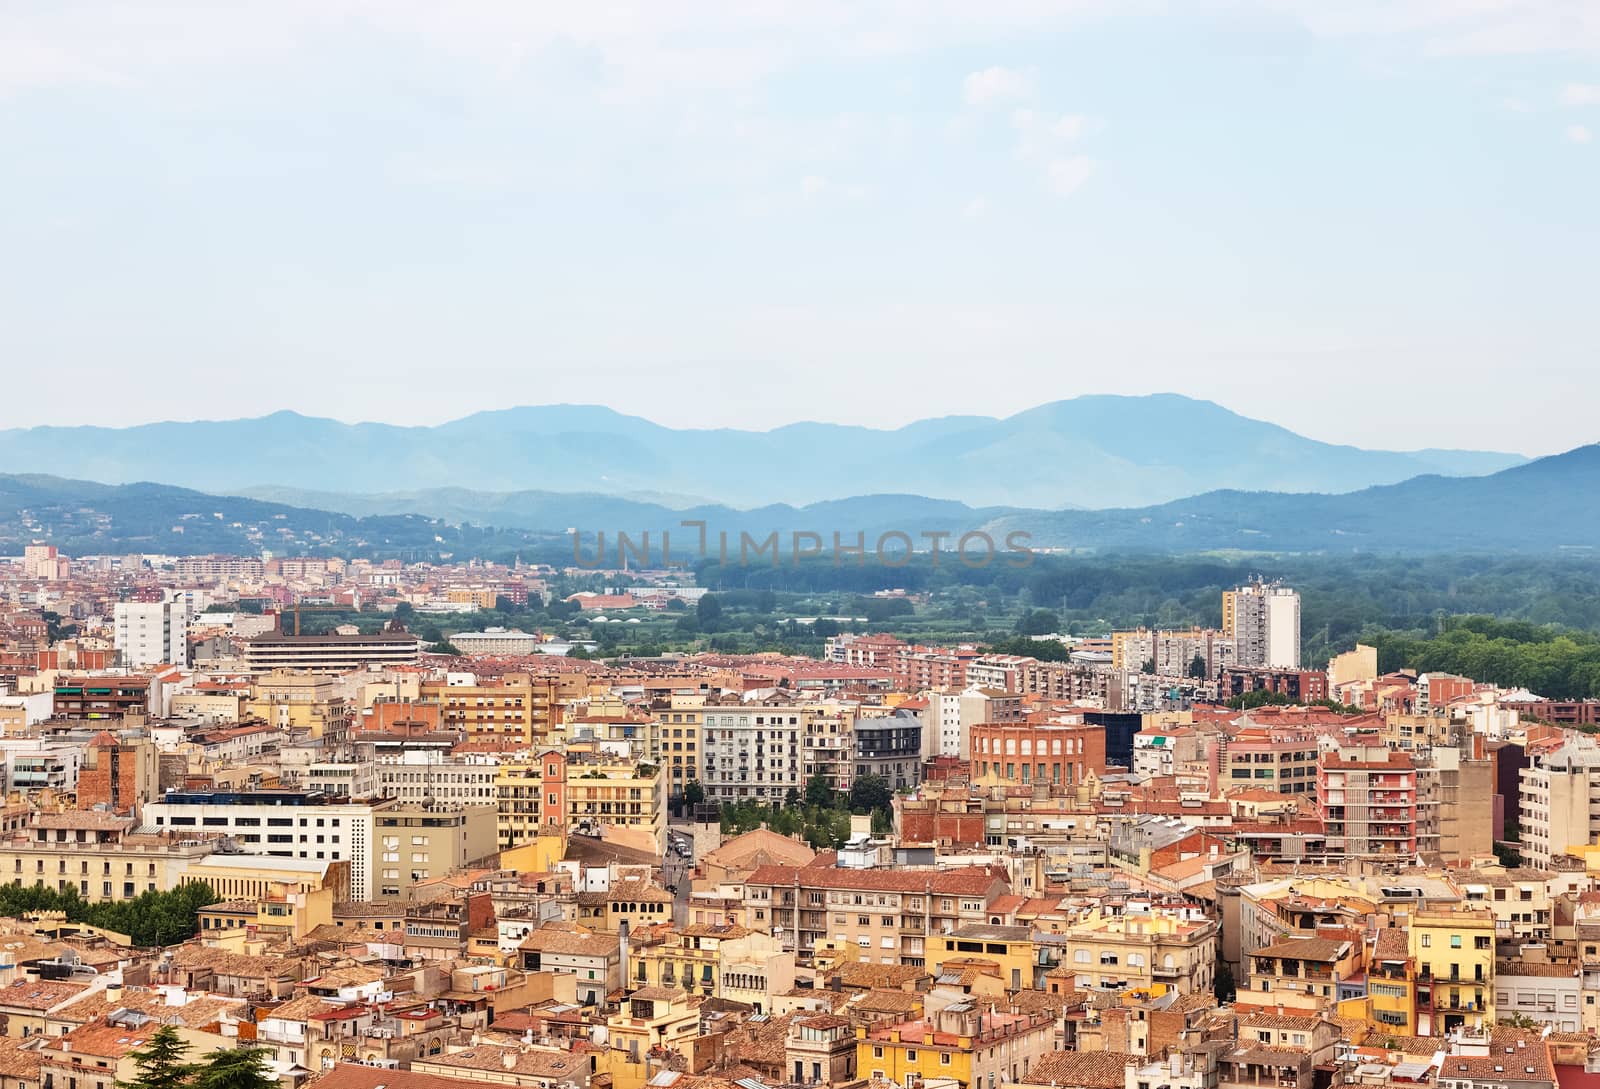 Picturesque city of Girona surrounded by mountains by anikasalsera